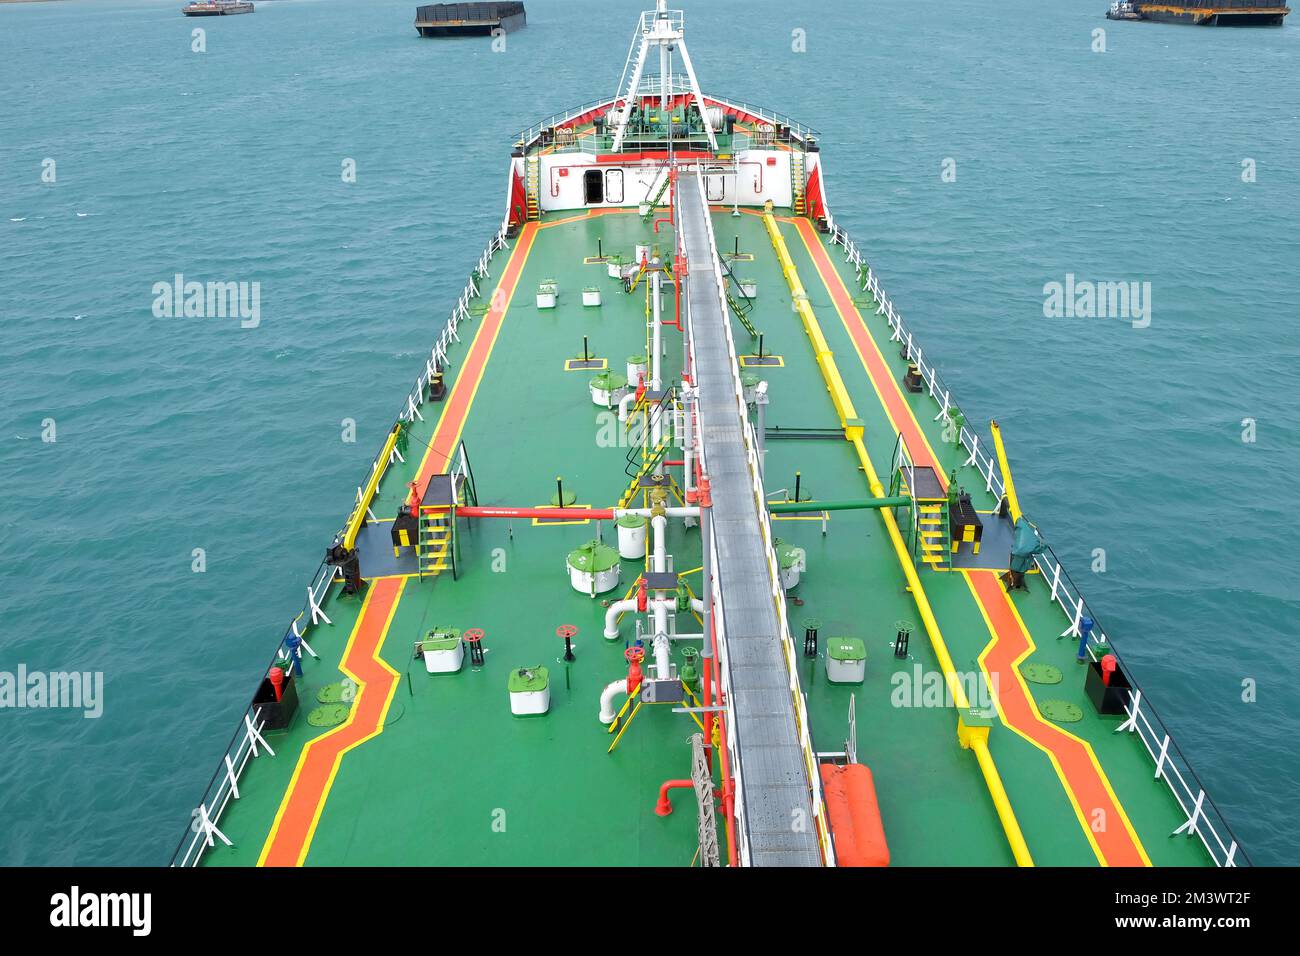 Aerial view of the bow of a chemical tanker. Industrial fuel tanker anchored in the water Stock Photo